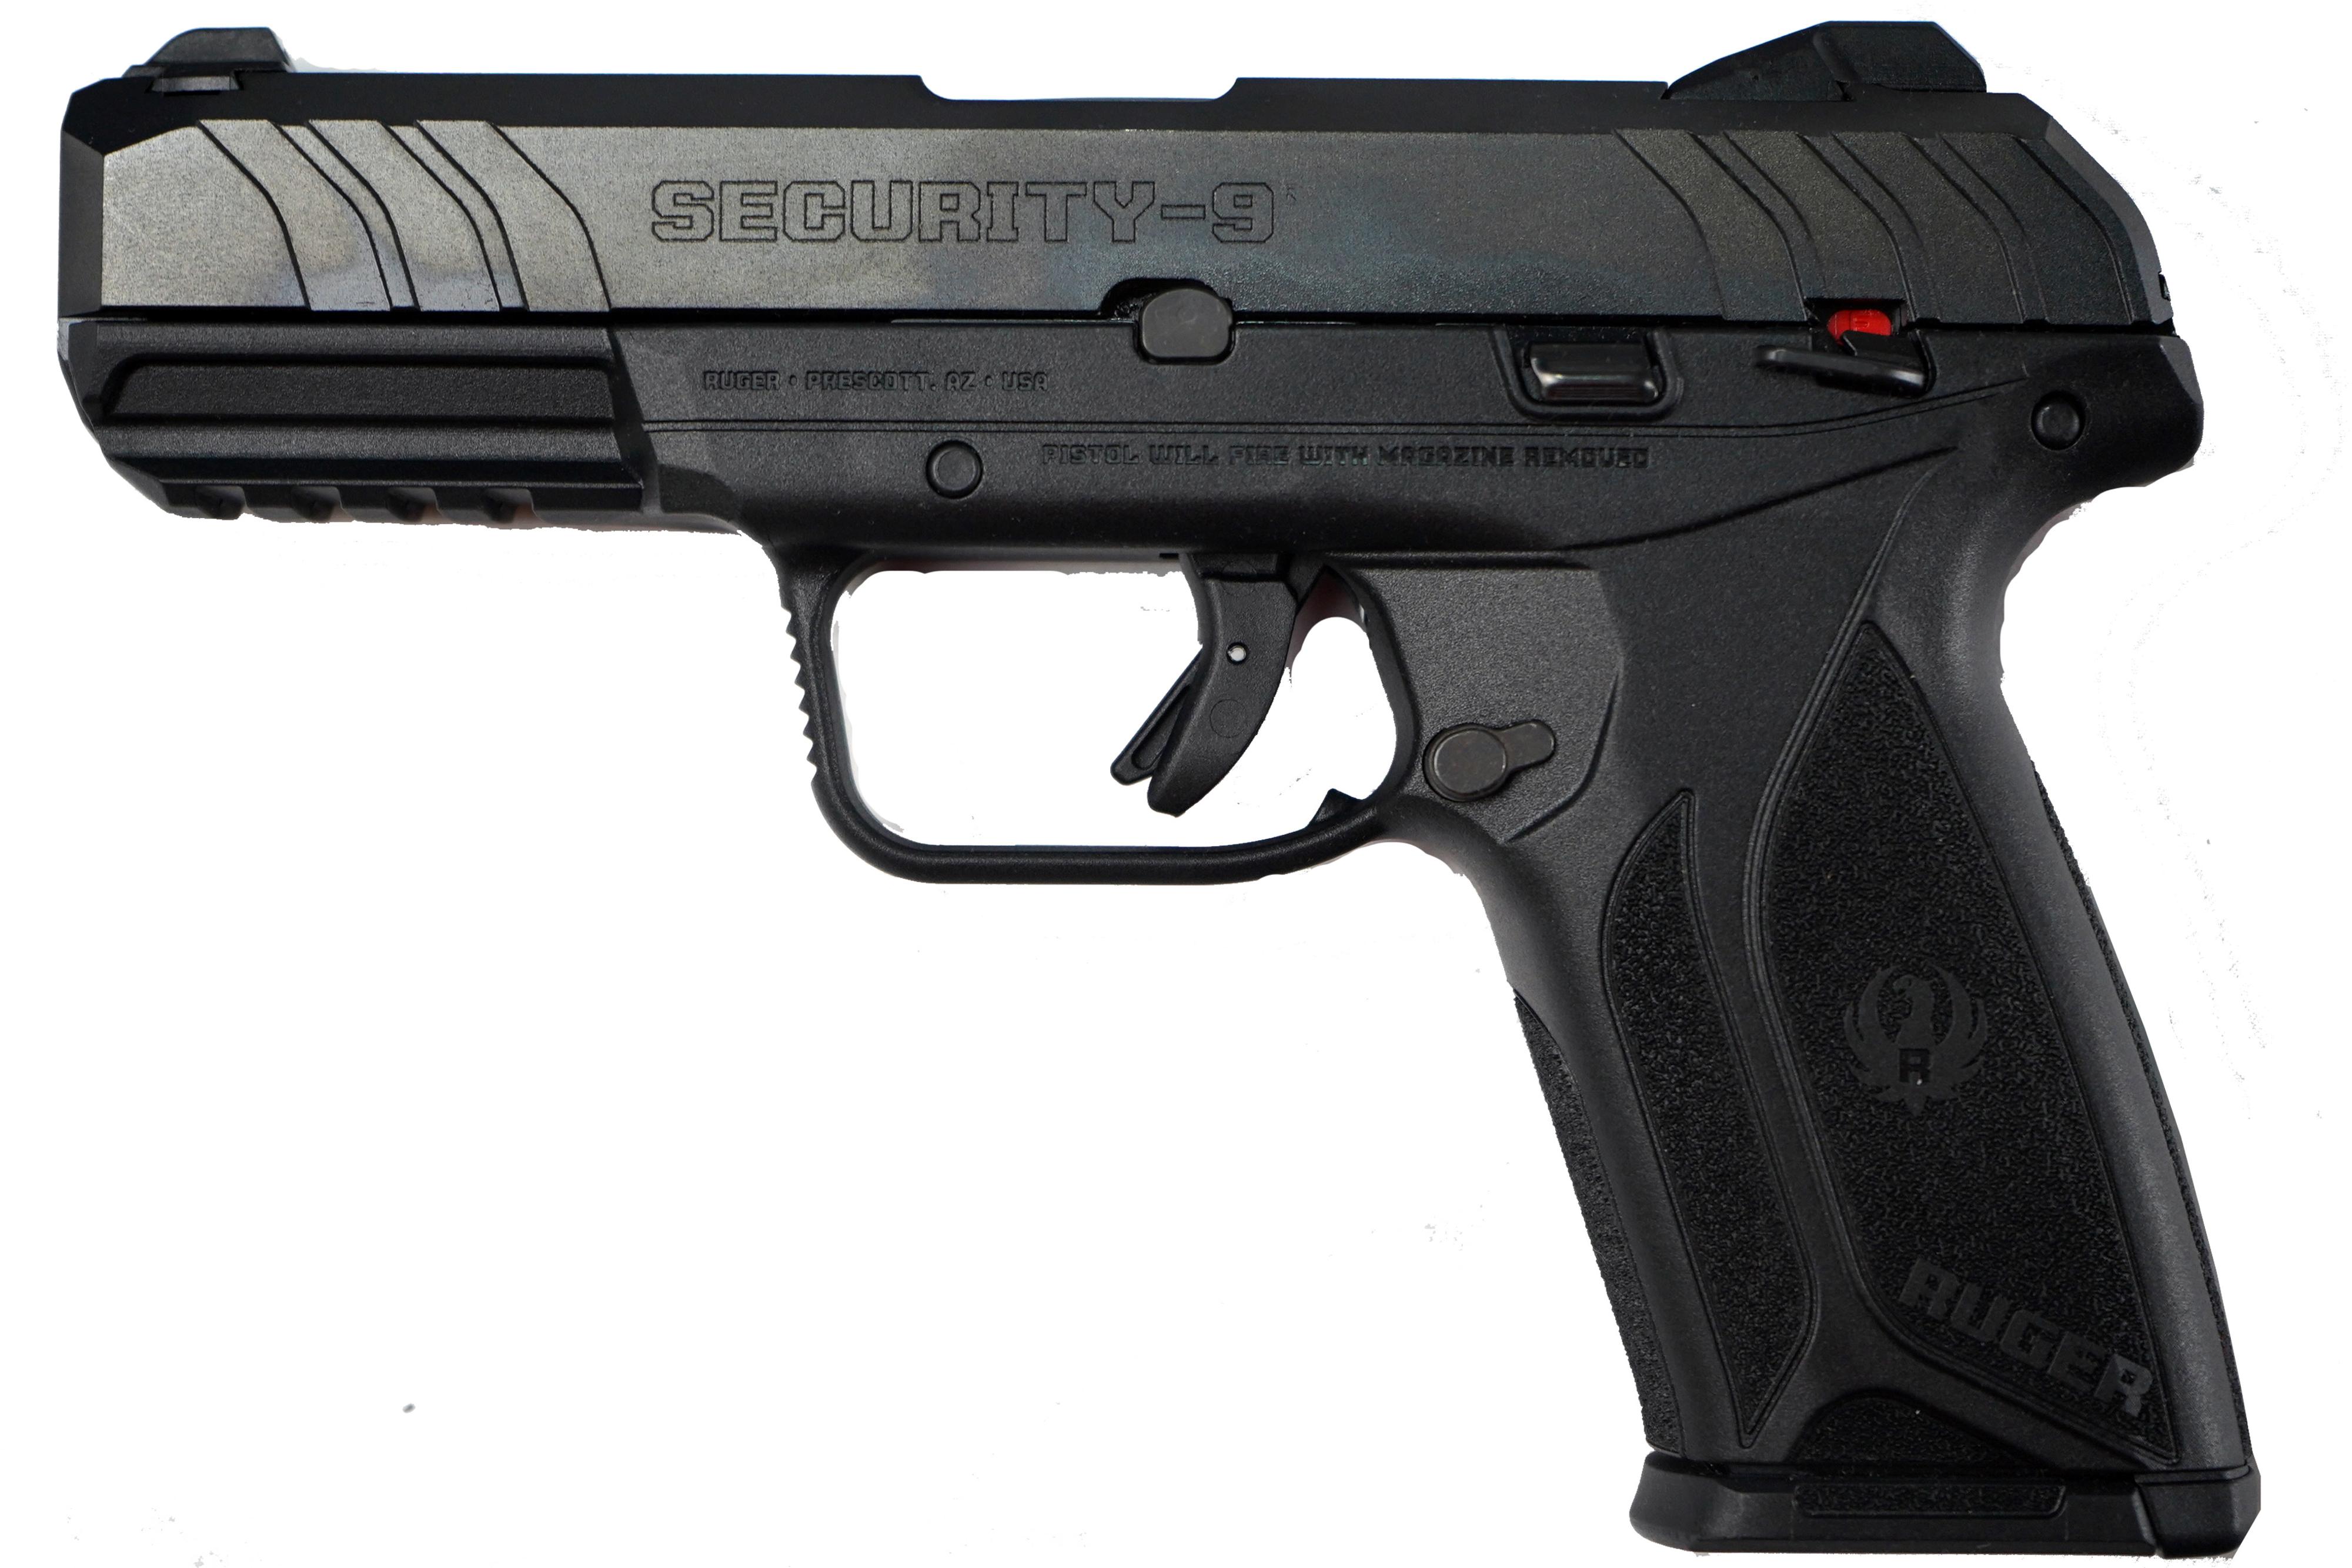 Ruger Security-9, Double Action, Semi-automatic, Polymer Frame Pistol, Full...